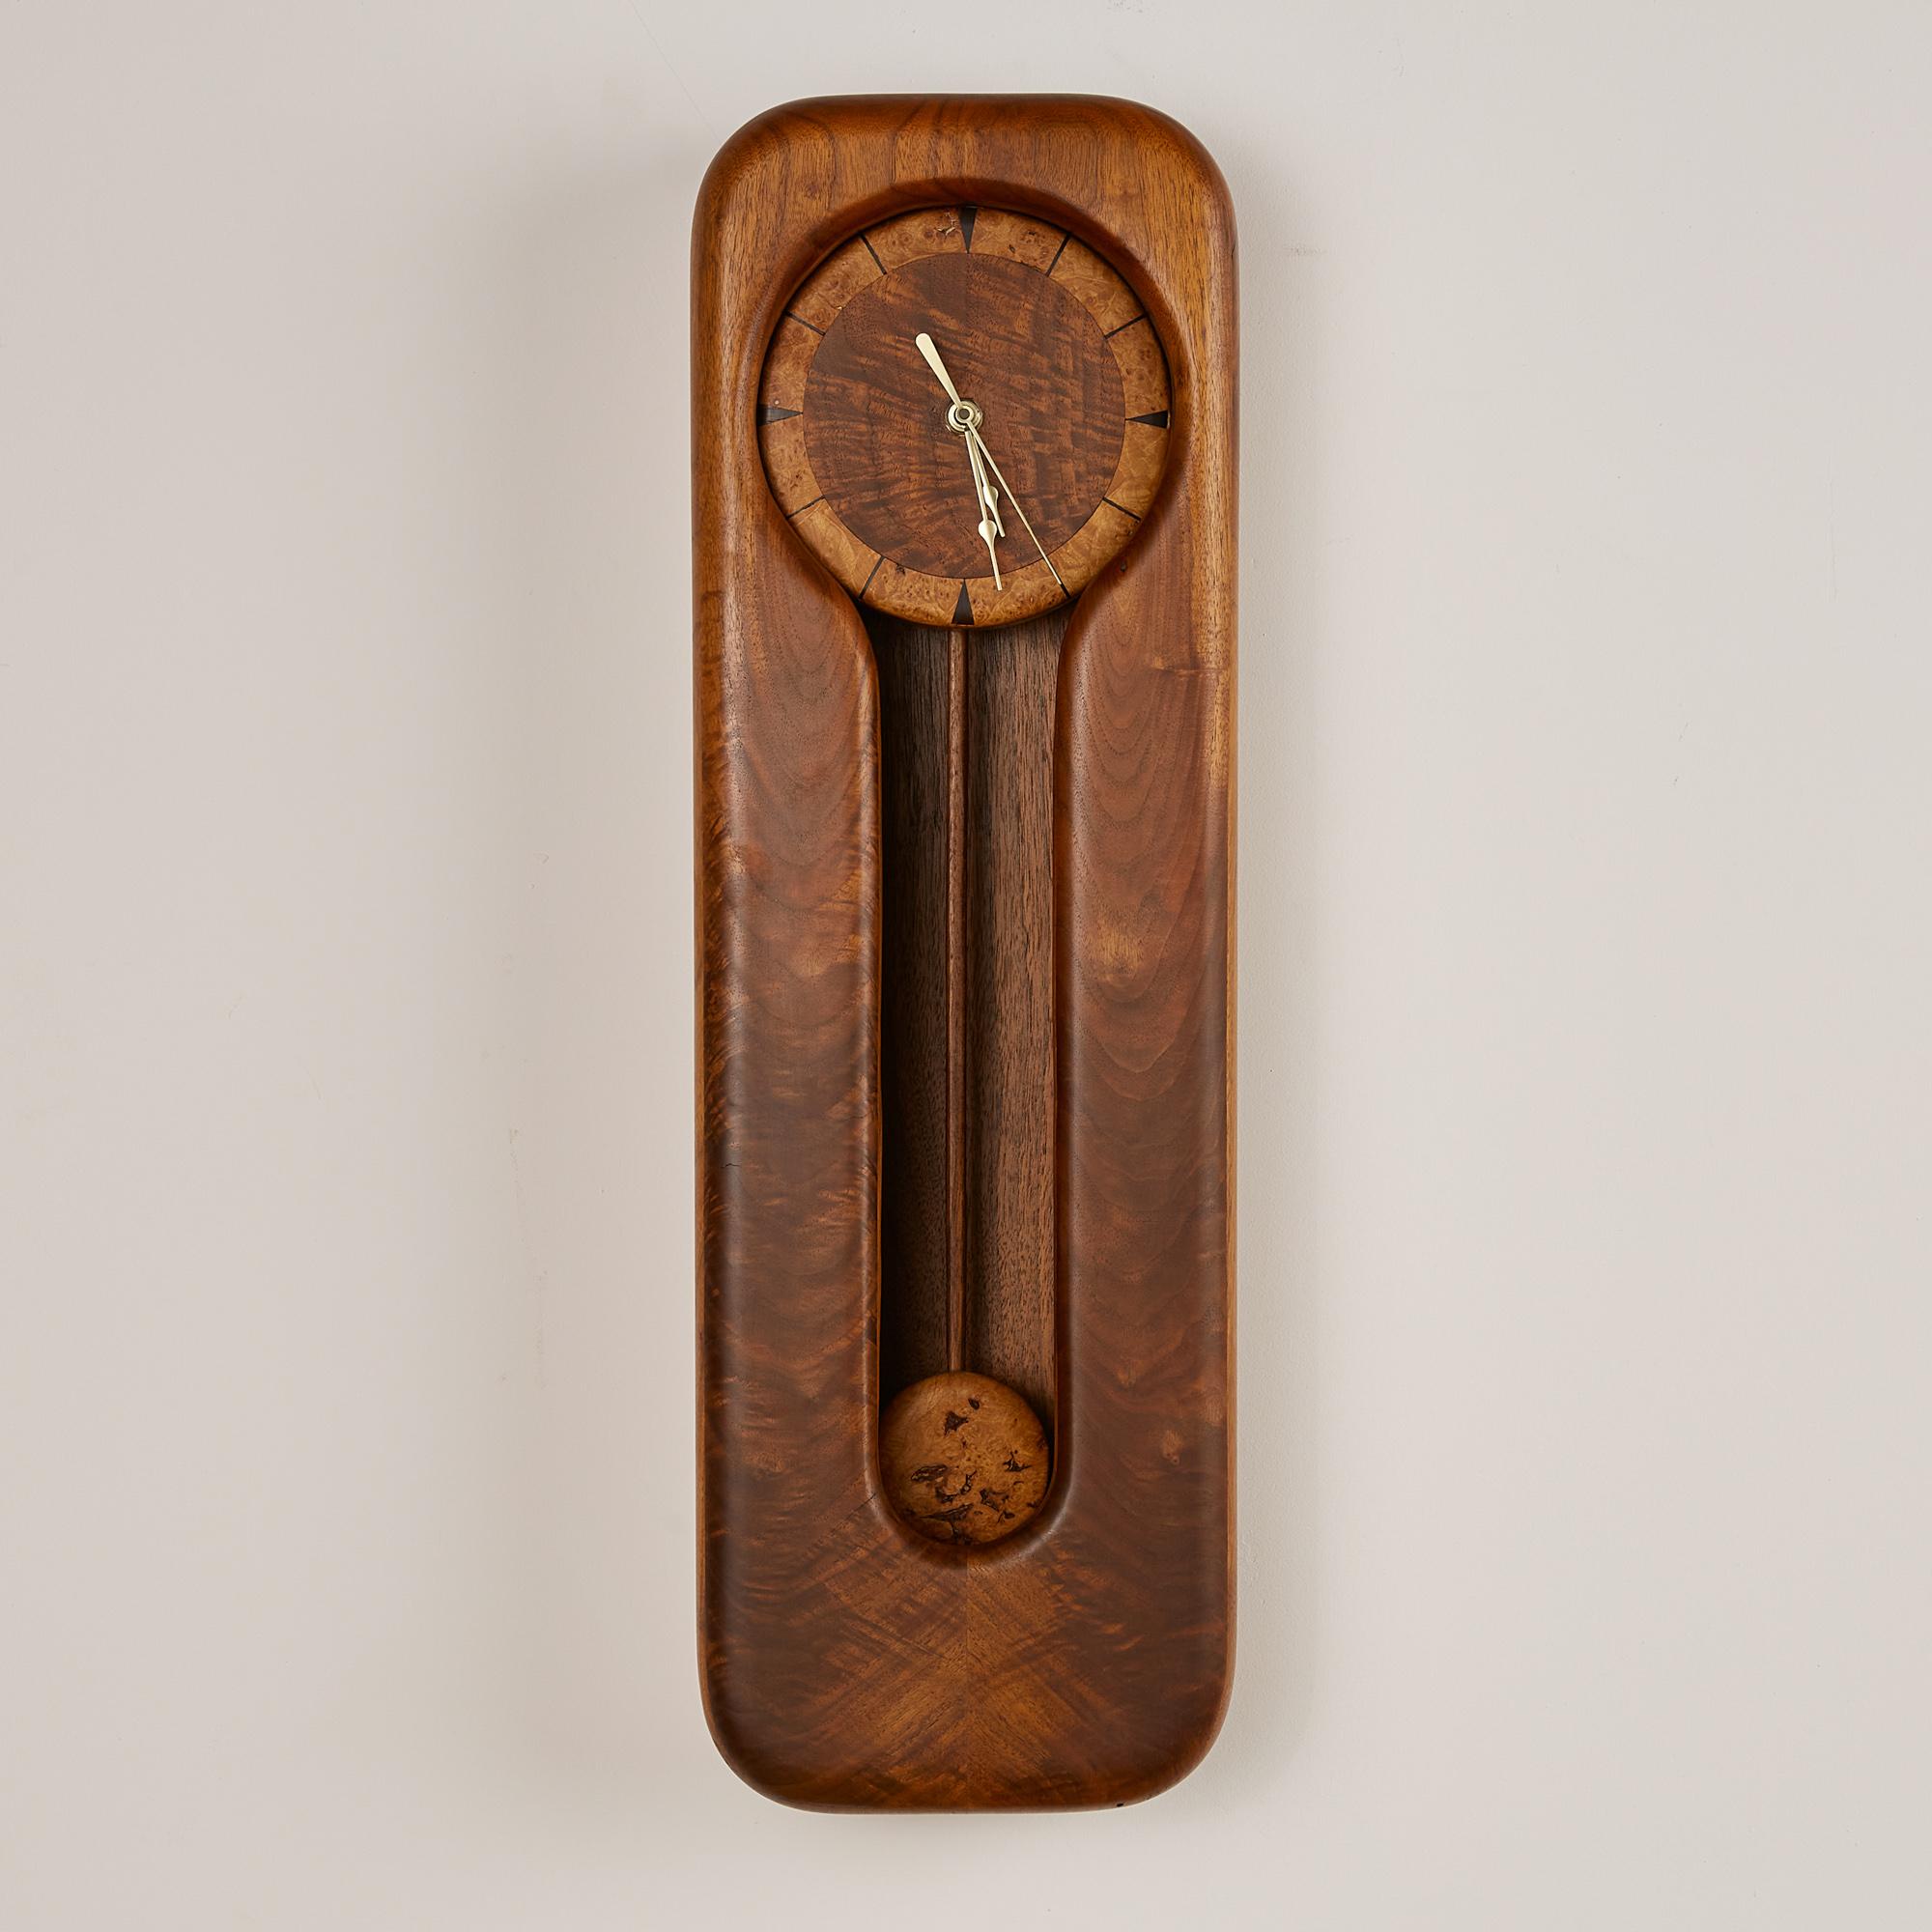 This Pendulum clock features a solid walnut frame with a stunning cathedraling that is inherent of the natural movement in the wood grain. The face of the clock appears to be floating and showcases a solid walnut center while the outer edge has a